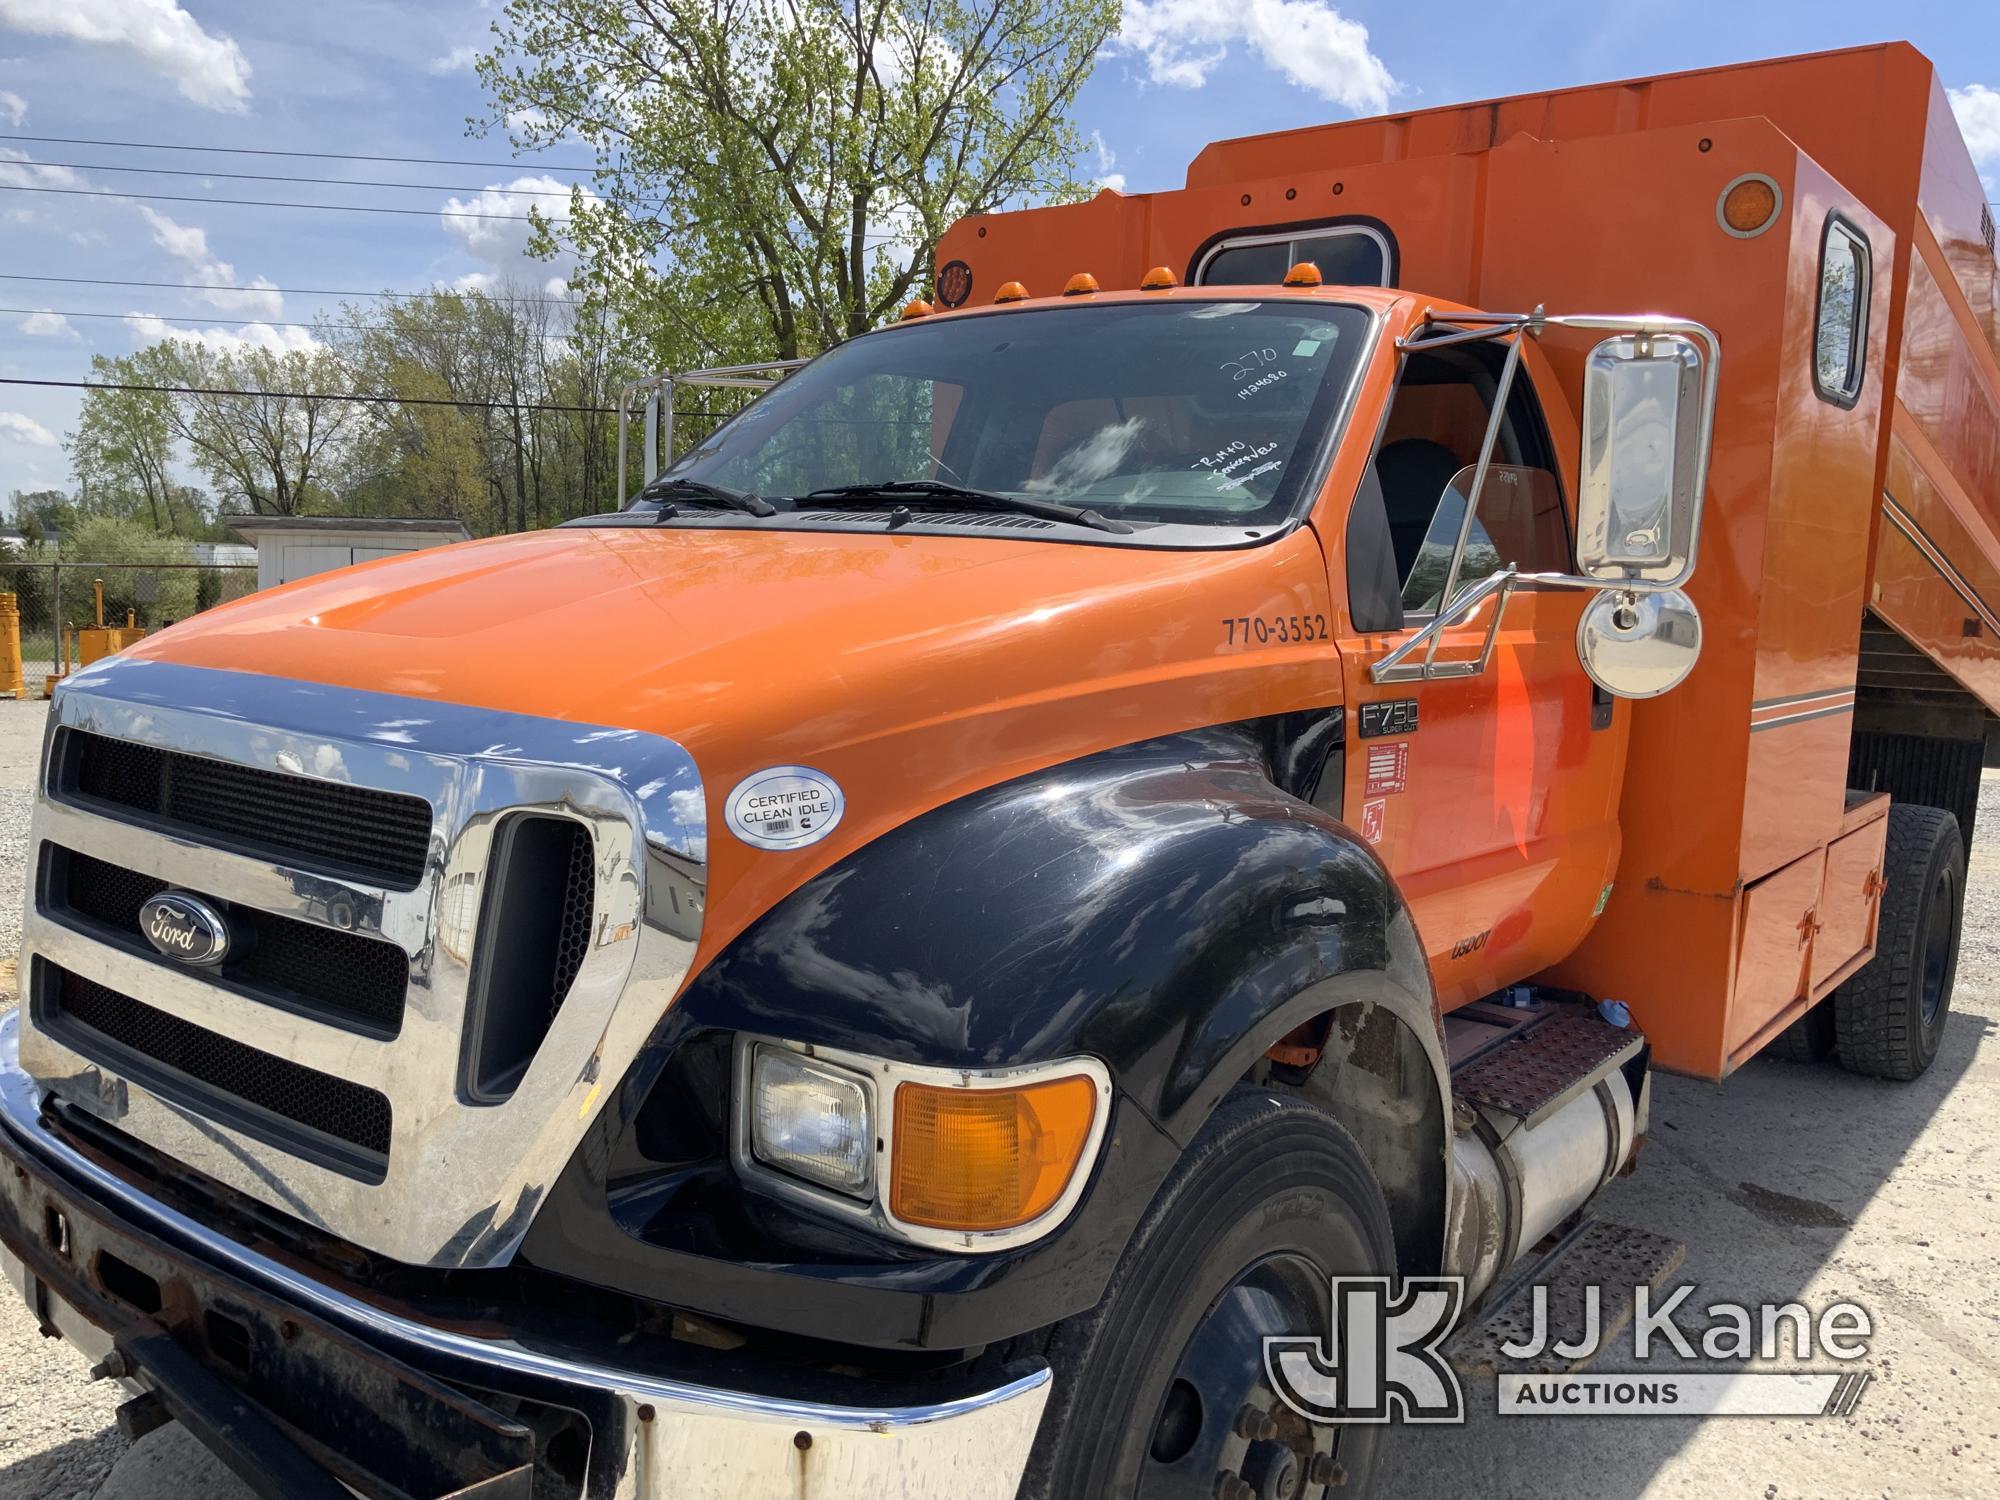 (Fort Wayne, IN) 2013 Ford F750 Chipper Dump Truck Runs, Moves & Operates) (PTO Cable Partially Seiz